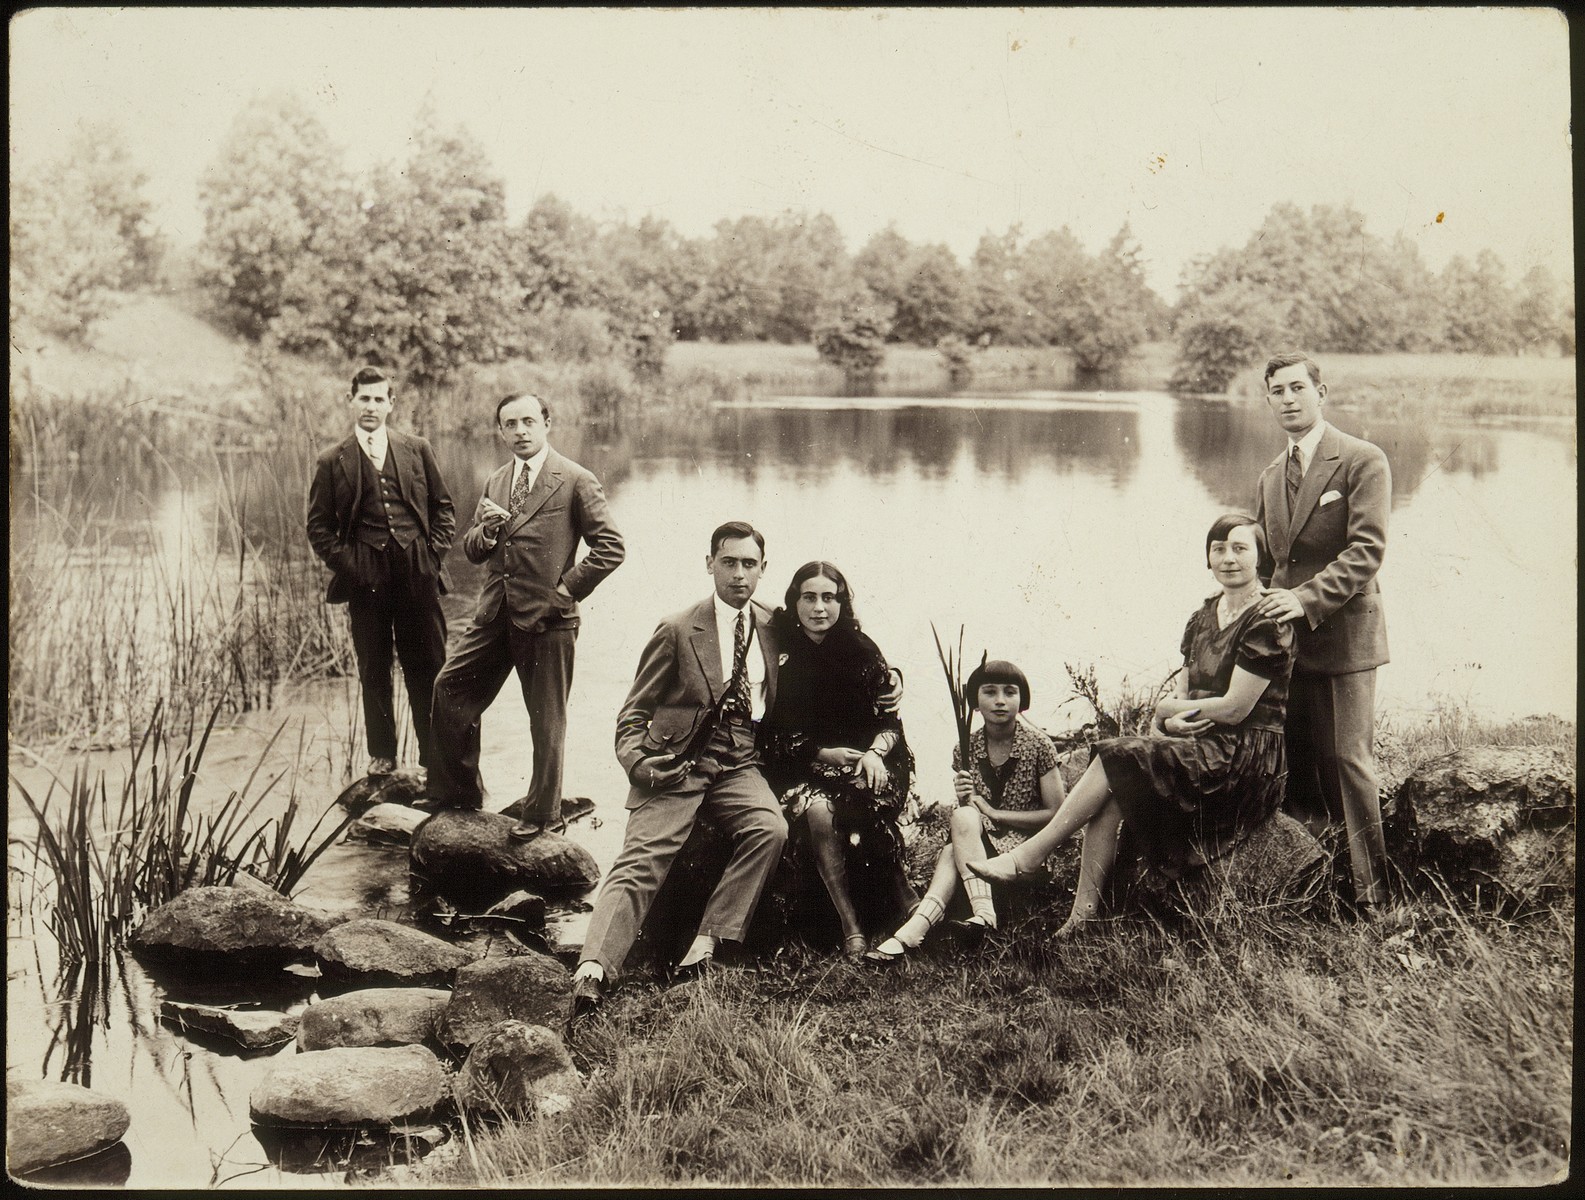 Members of the Kudlanski and Dubrowicz families pose on the shore of a lake near Eisiskes.

Among those pictured are Hanneh-Beile (Moszczenik) Kudlanski (second from the right), her daughter Atara Kudlanski, Leah Dubrowicz and her brother Shaul Dubrowicz.  The Kudlanski family immigrated to America; the Dubrowiczes perished during the Holocaust.